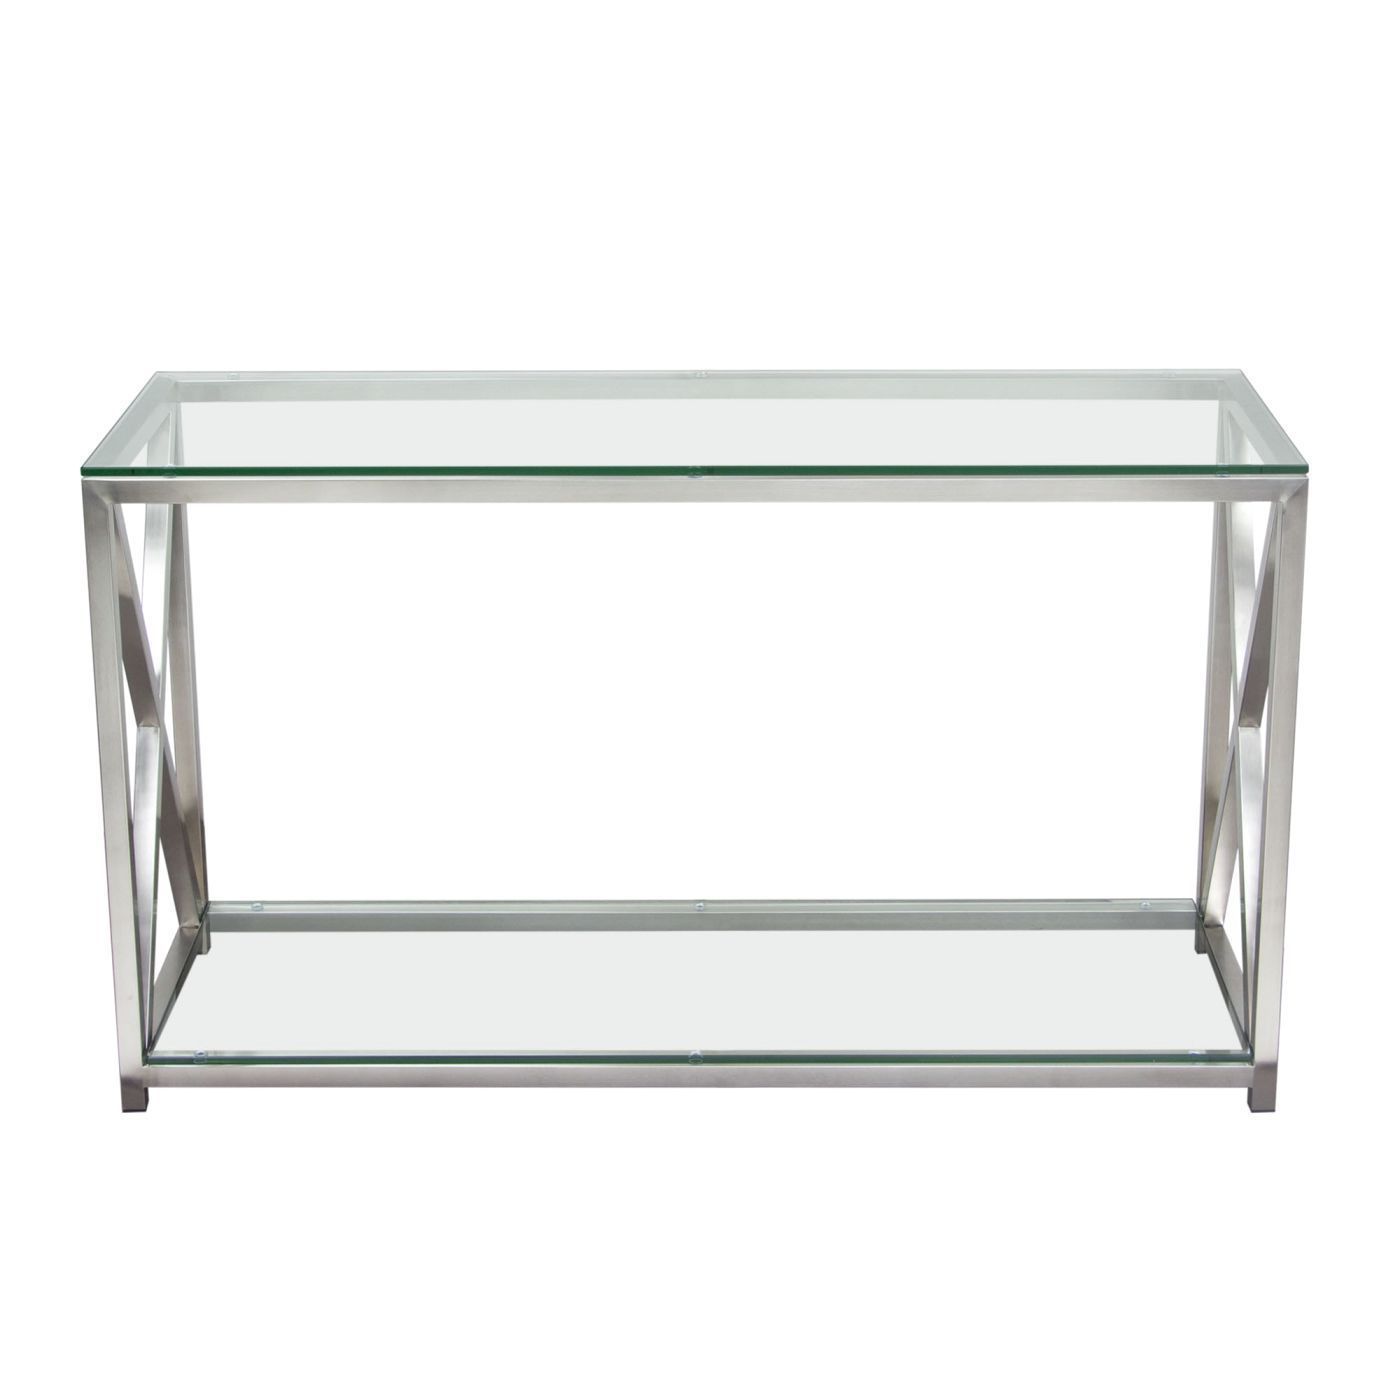 Buy Diamond Sofa Xfactorcs X Factor Console Table With Within Clear Glass Top Console Tables (View 16 of 20)